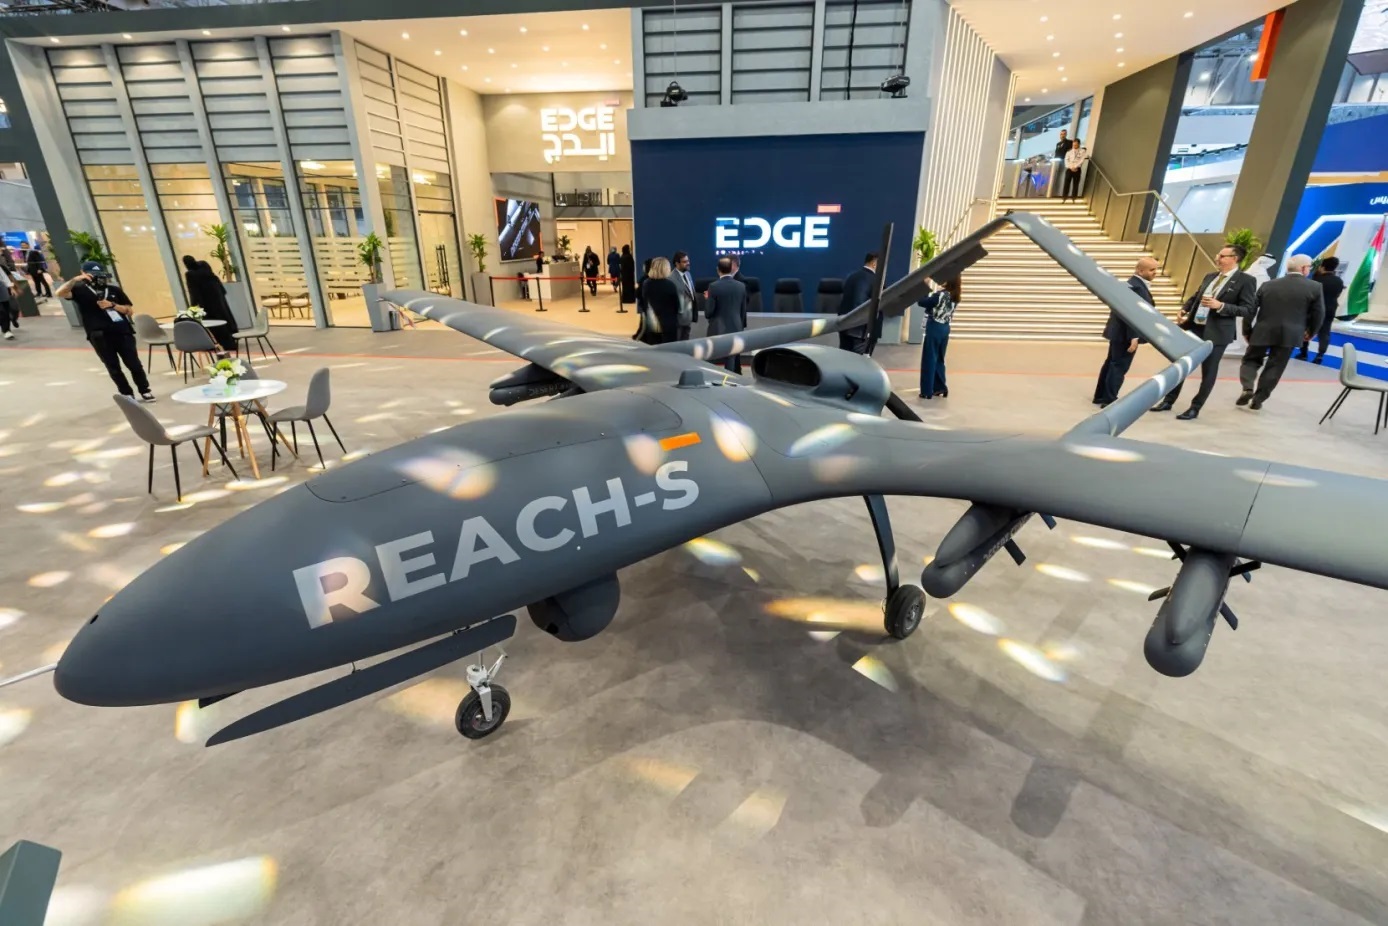 EDGE Awarded UAE Ministry of Defence Contract for 100 REACH-S Unmanned Aircraft